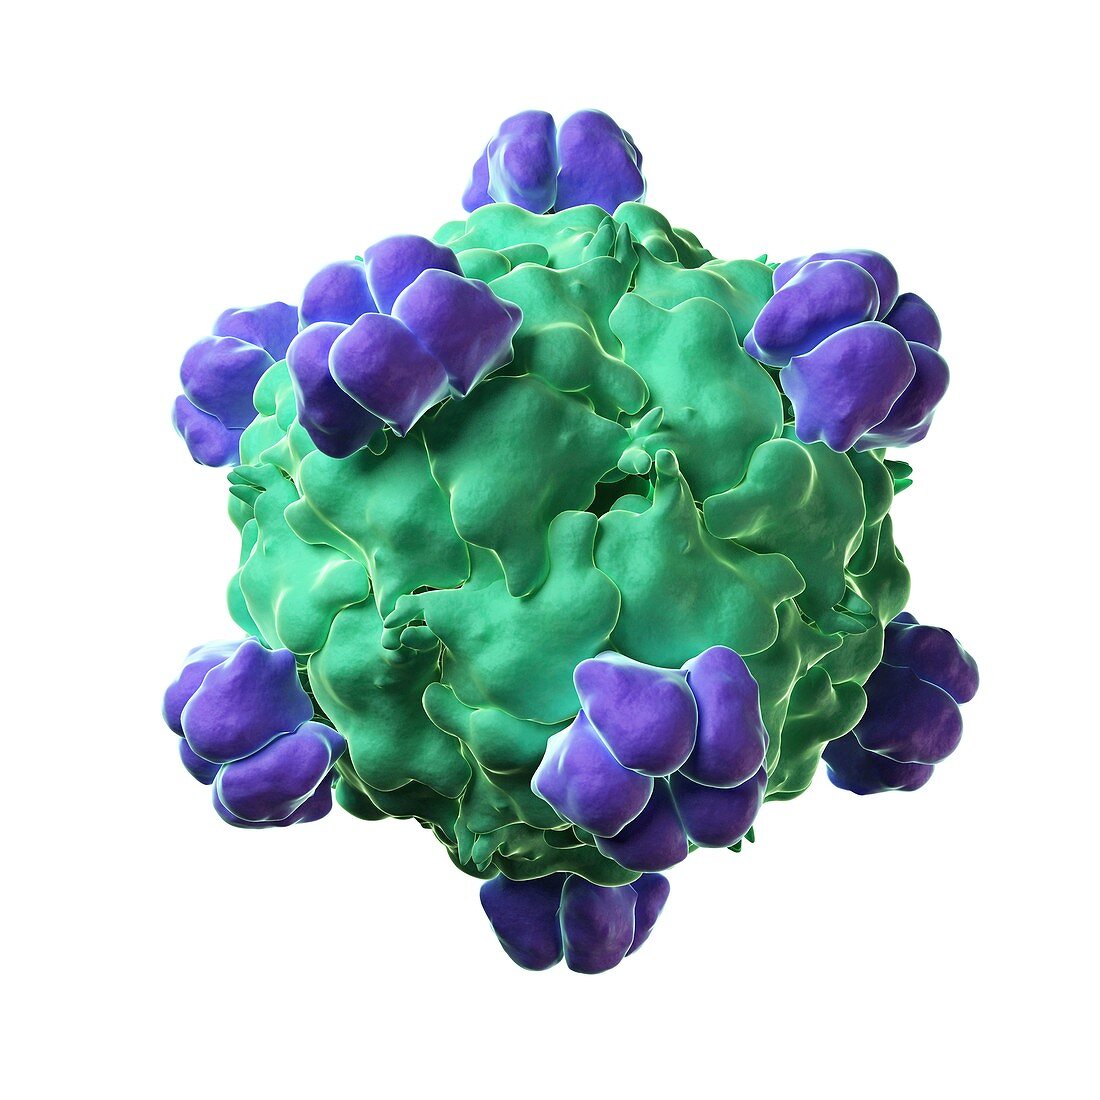 Bacteriophage X-174 particle